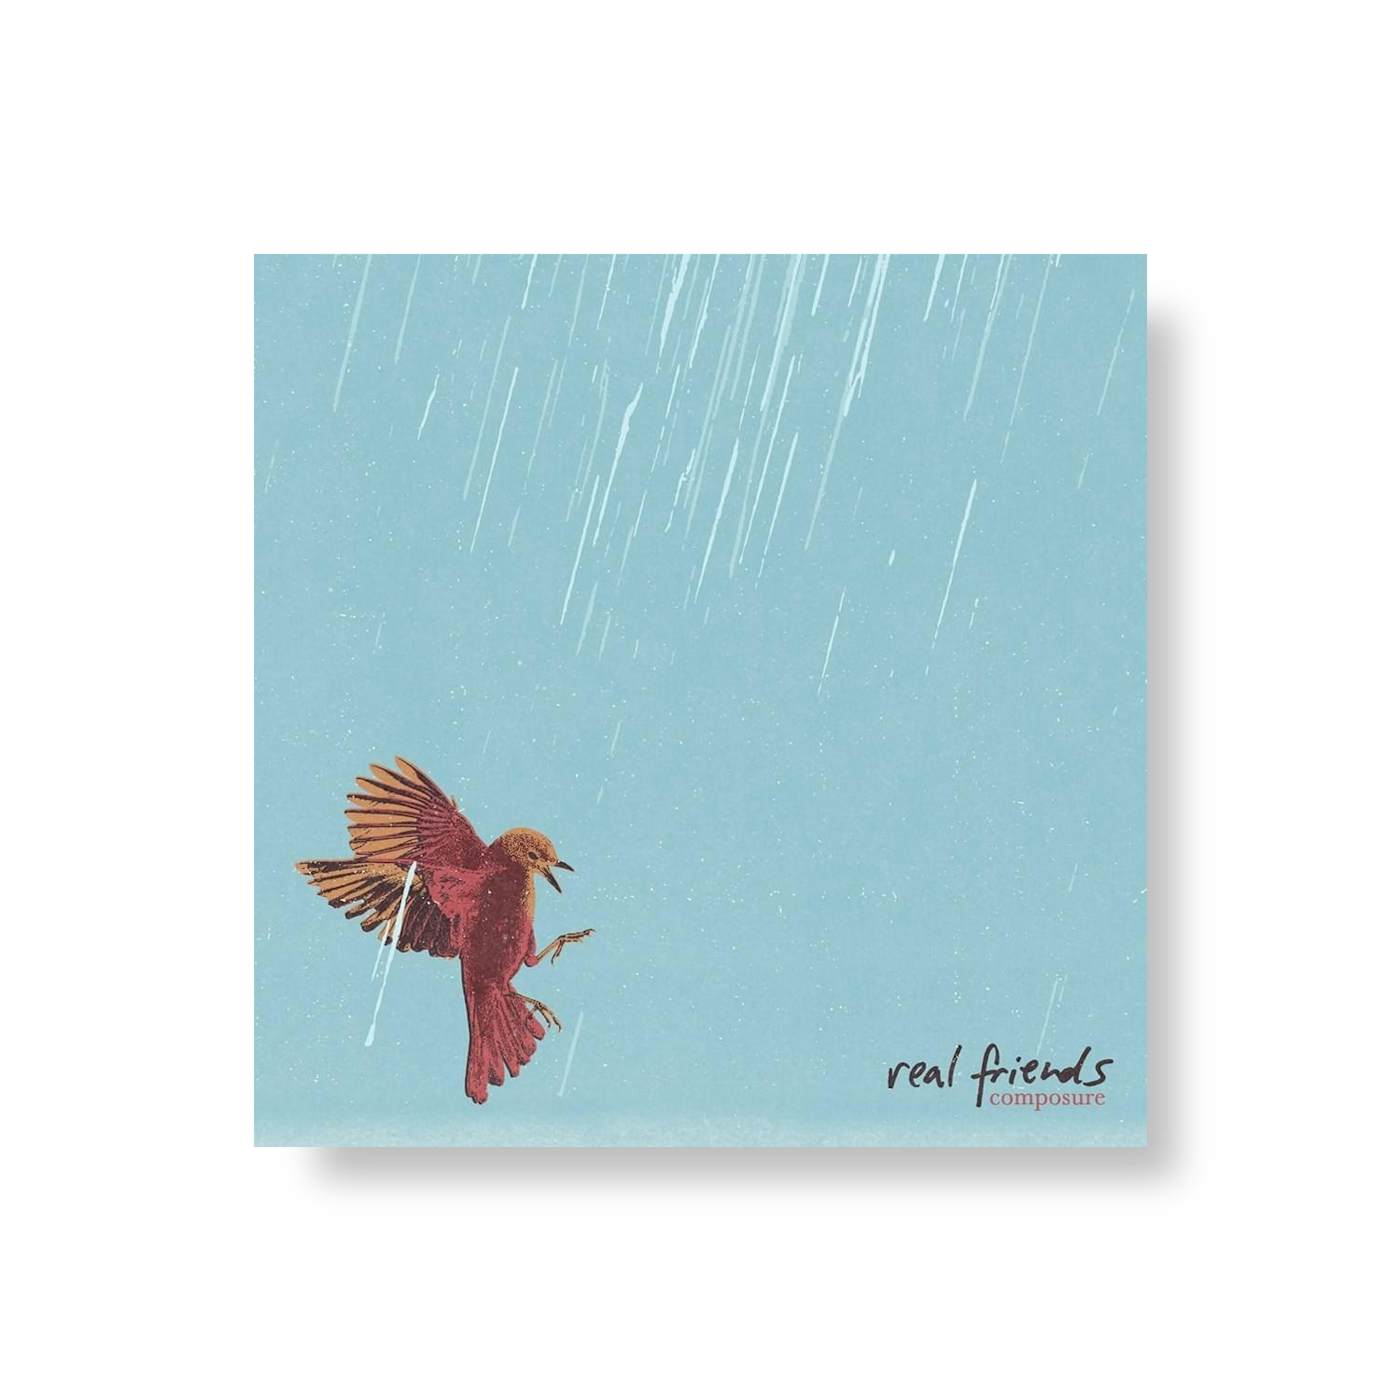 Real Friends Composure CD